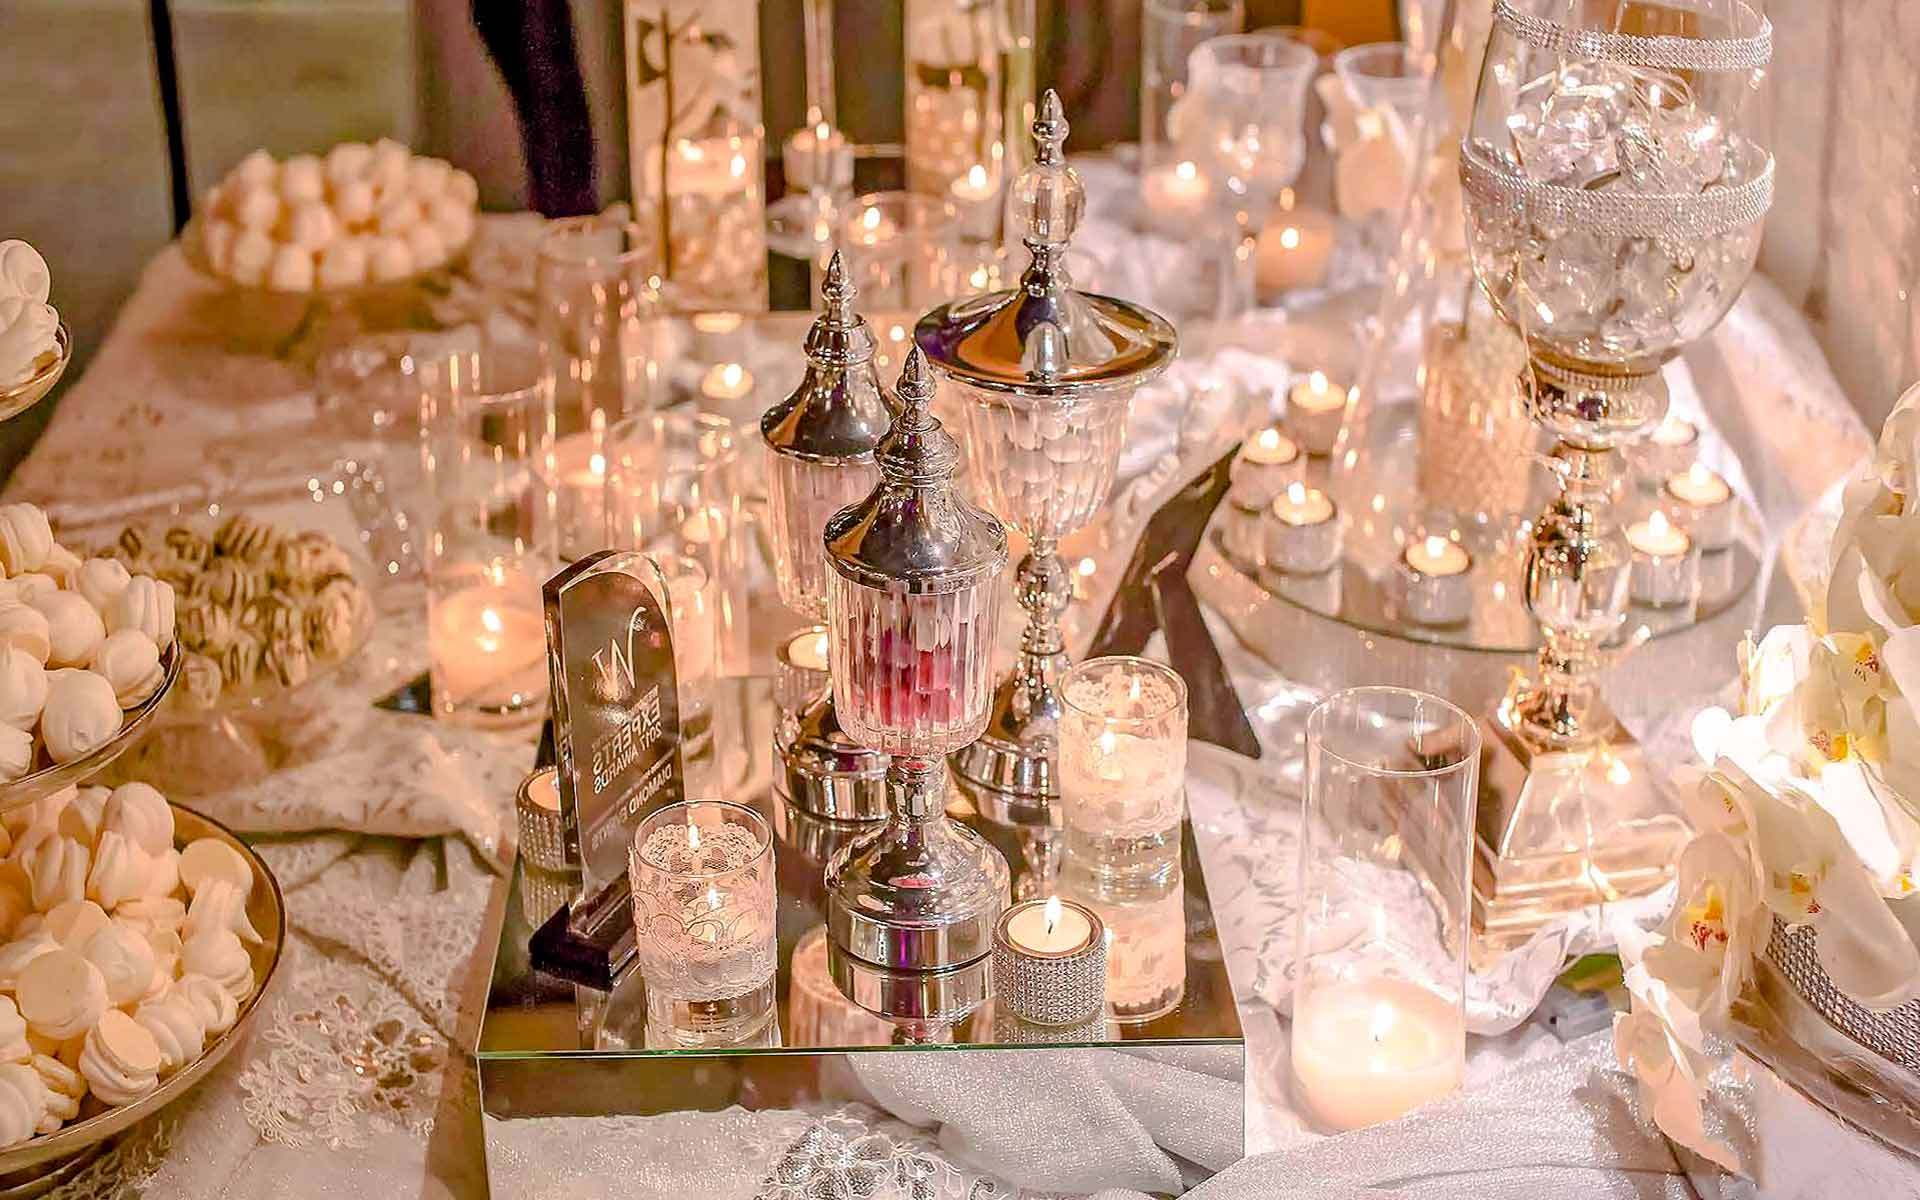 Glamorous-wedding-Guestbook-table-with-white-orchids-crystals-vases-mirrors-and-desserts